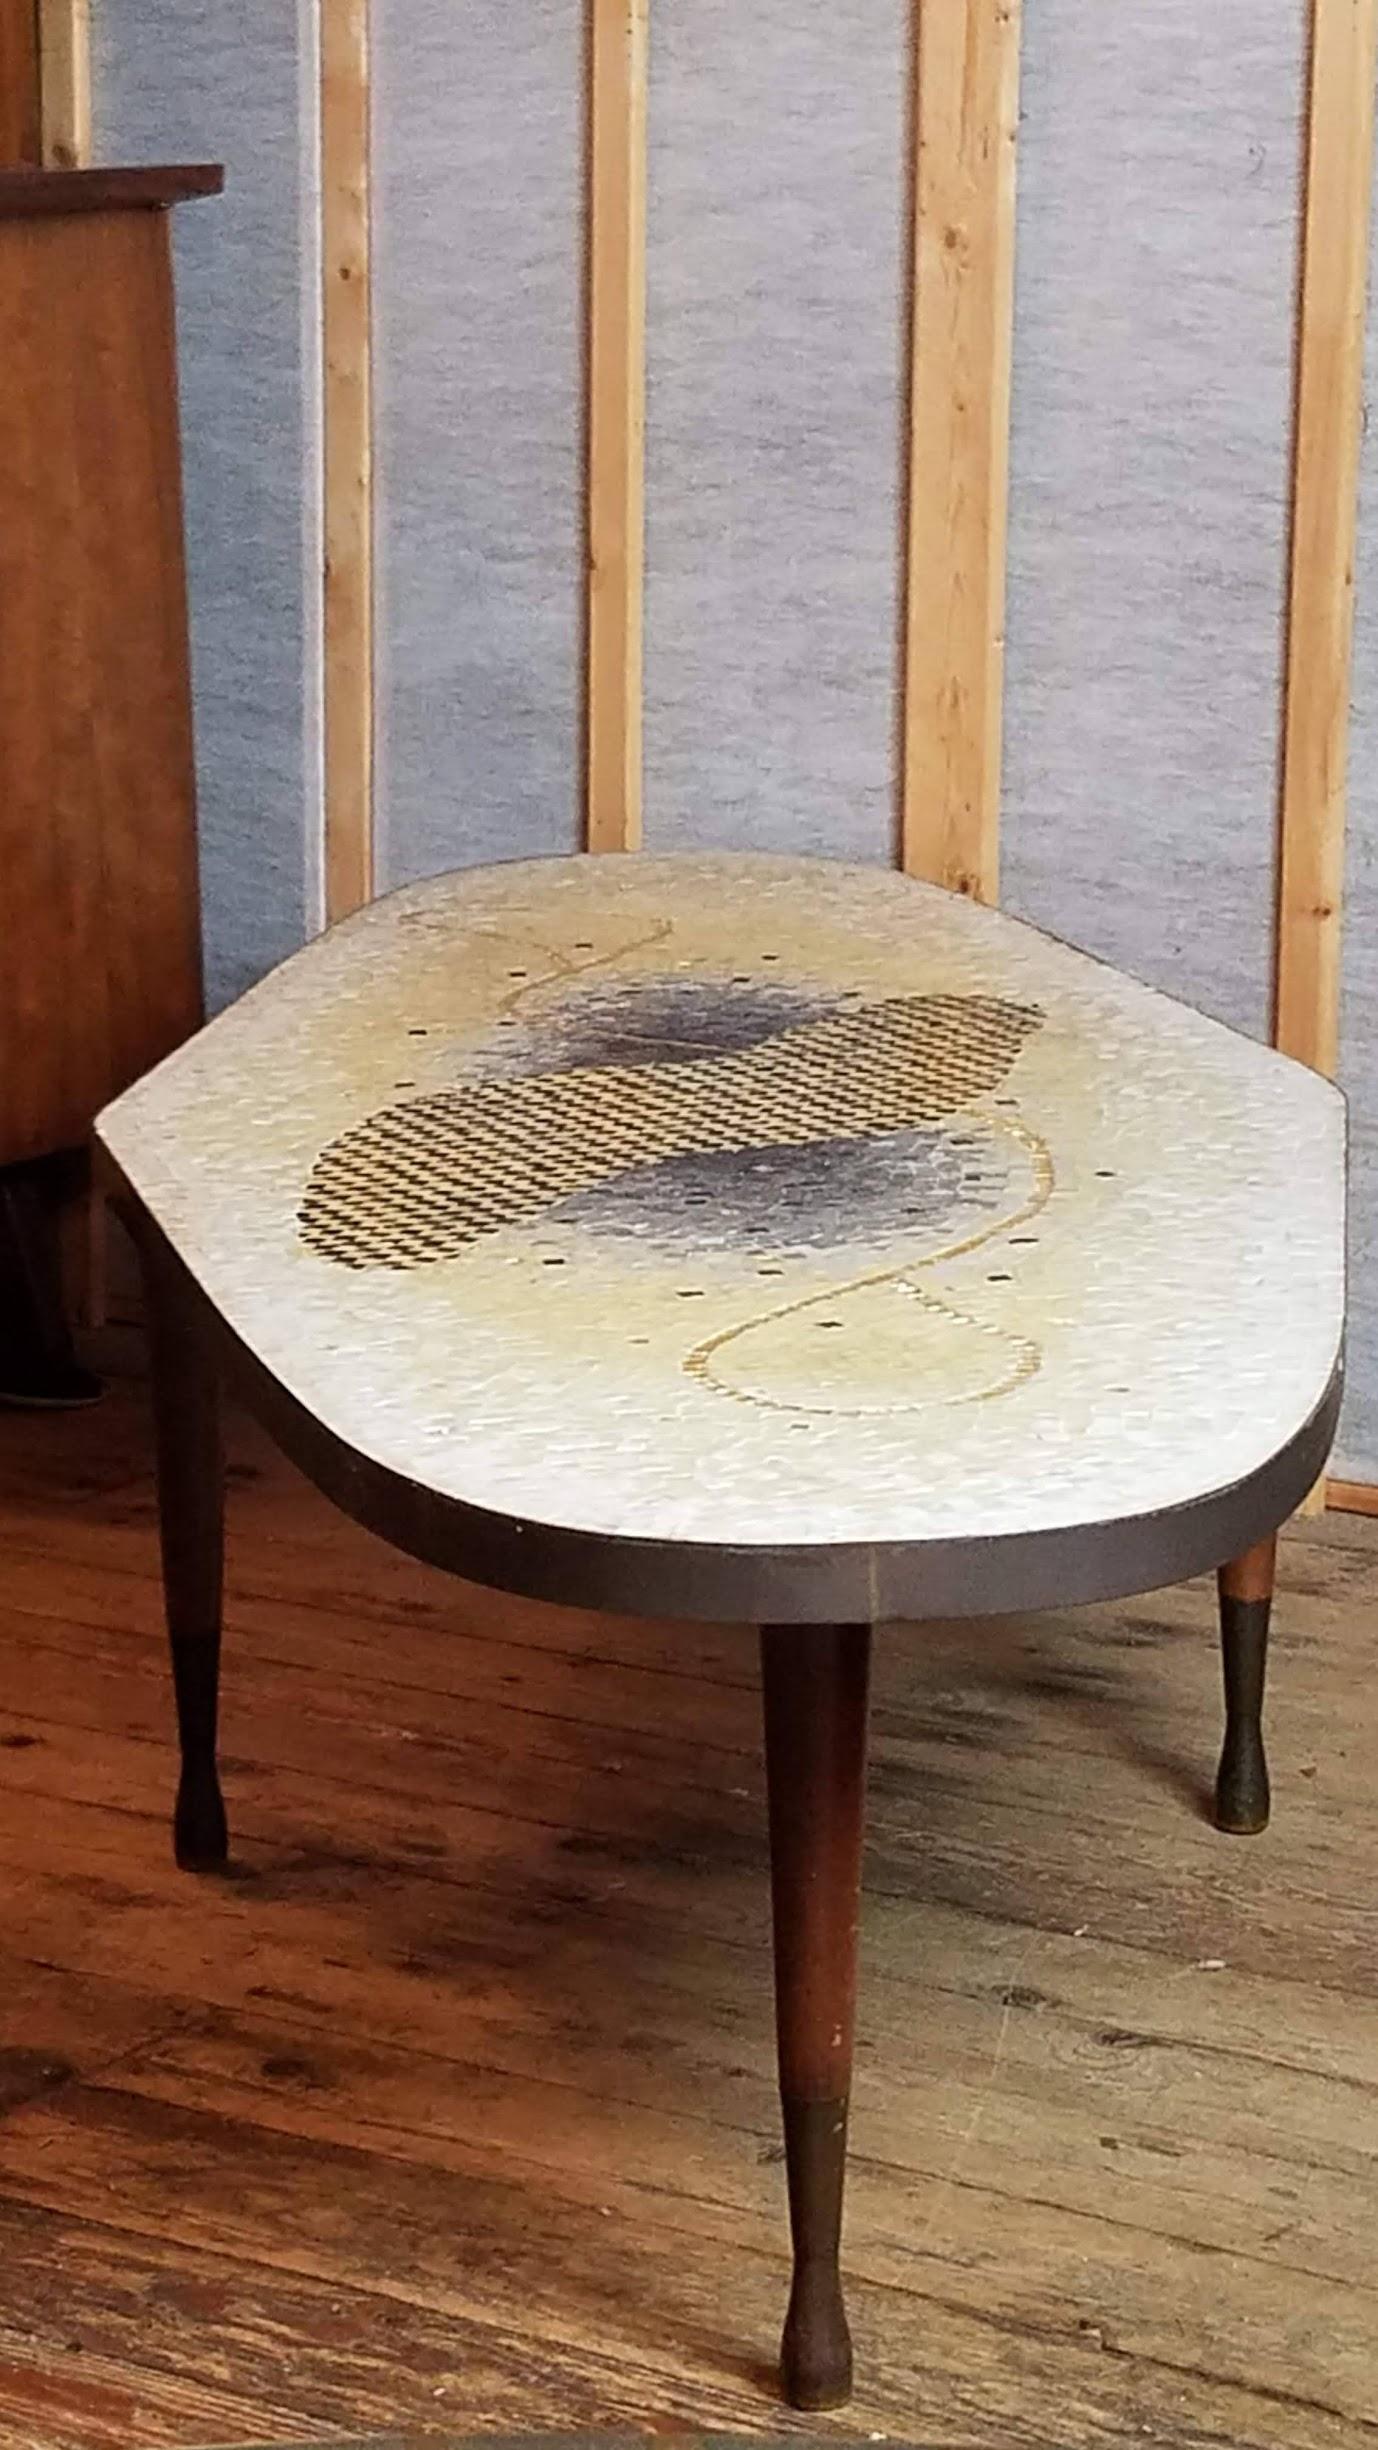 An unusual mosaic coffee table created in glass tile by Genaro Alvarez and handcrafted at his studio in Mexico City in the late 1950's.
There are three different compositional designs in the creation of this mosaic top.
The first is the abstract